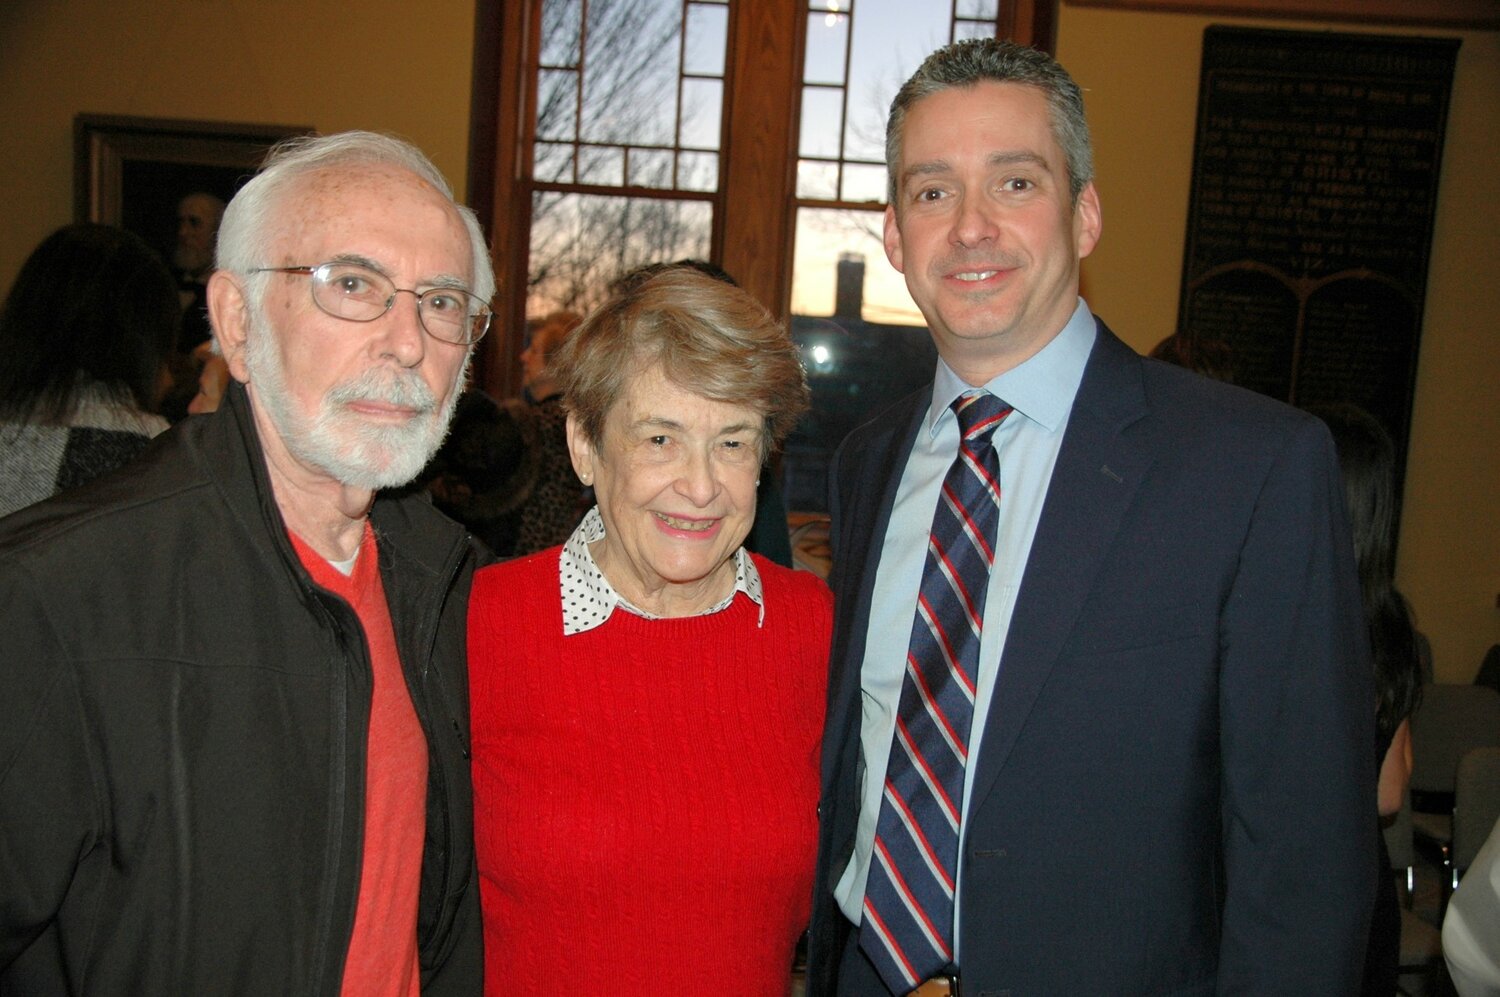 The late Leo Contente (left) seen here with wife Barbara and son Steve, was proud of his Portuguese heritage and his contributions to his beloved community.